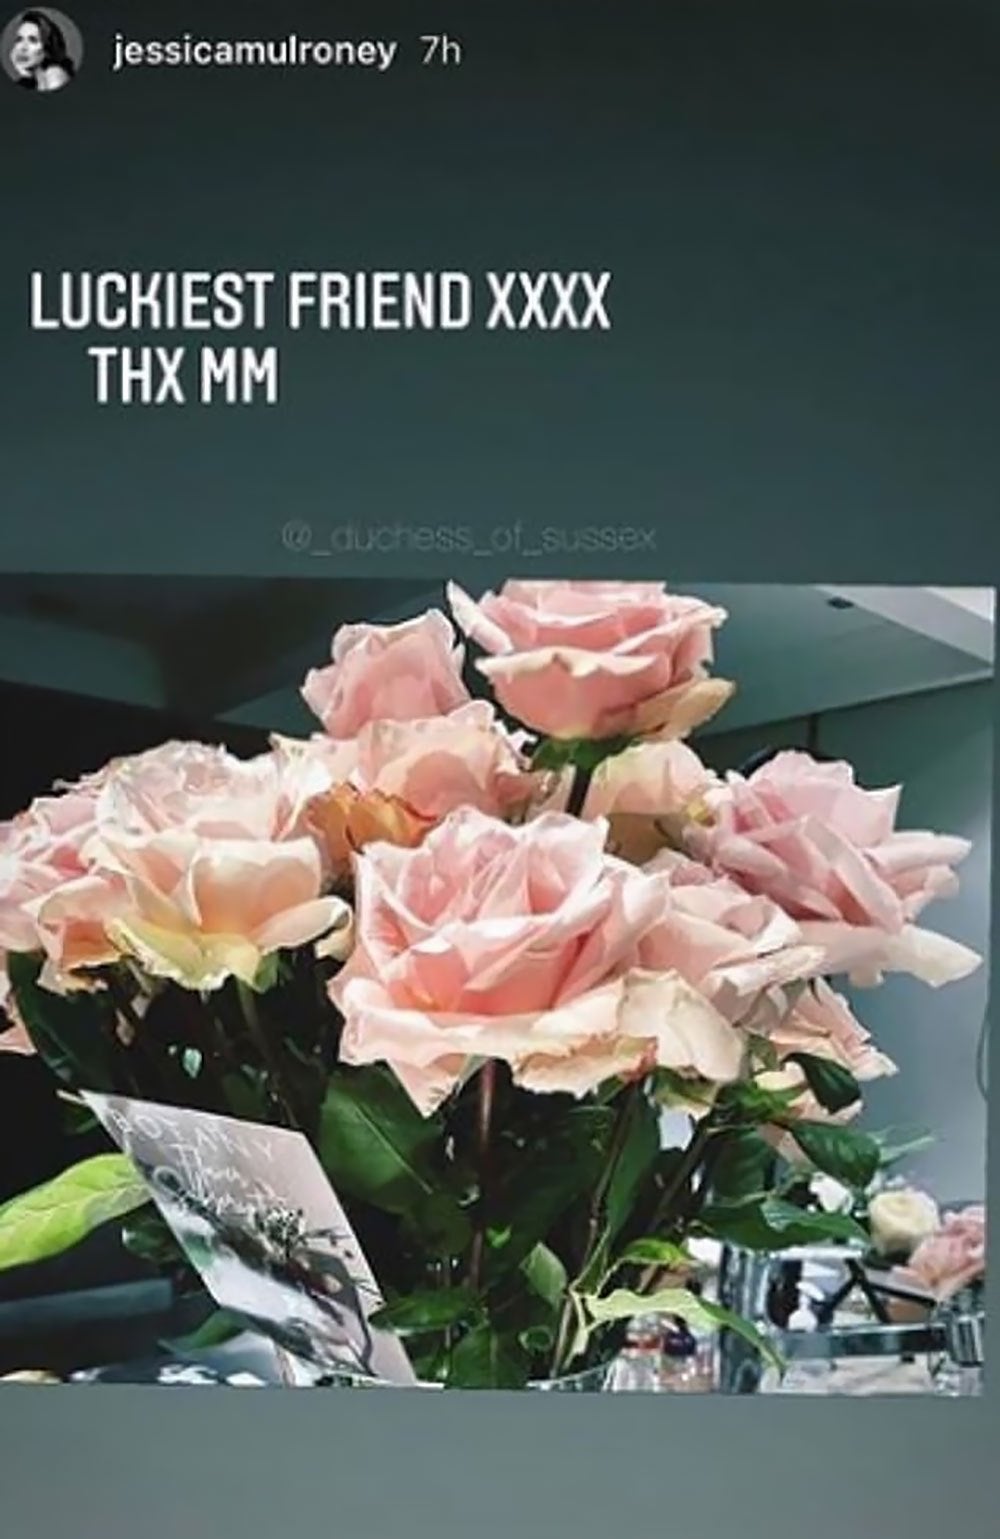 Screenshot of Jessica Mulroney’s Instagram story on Sunday featuring pink roses allegedly sent by her friend Meghan Markle